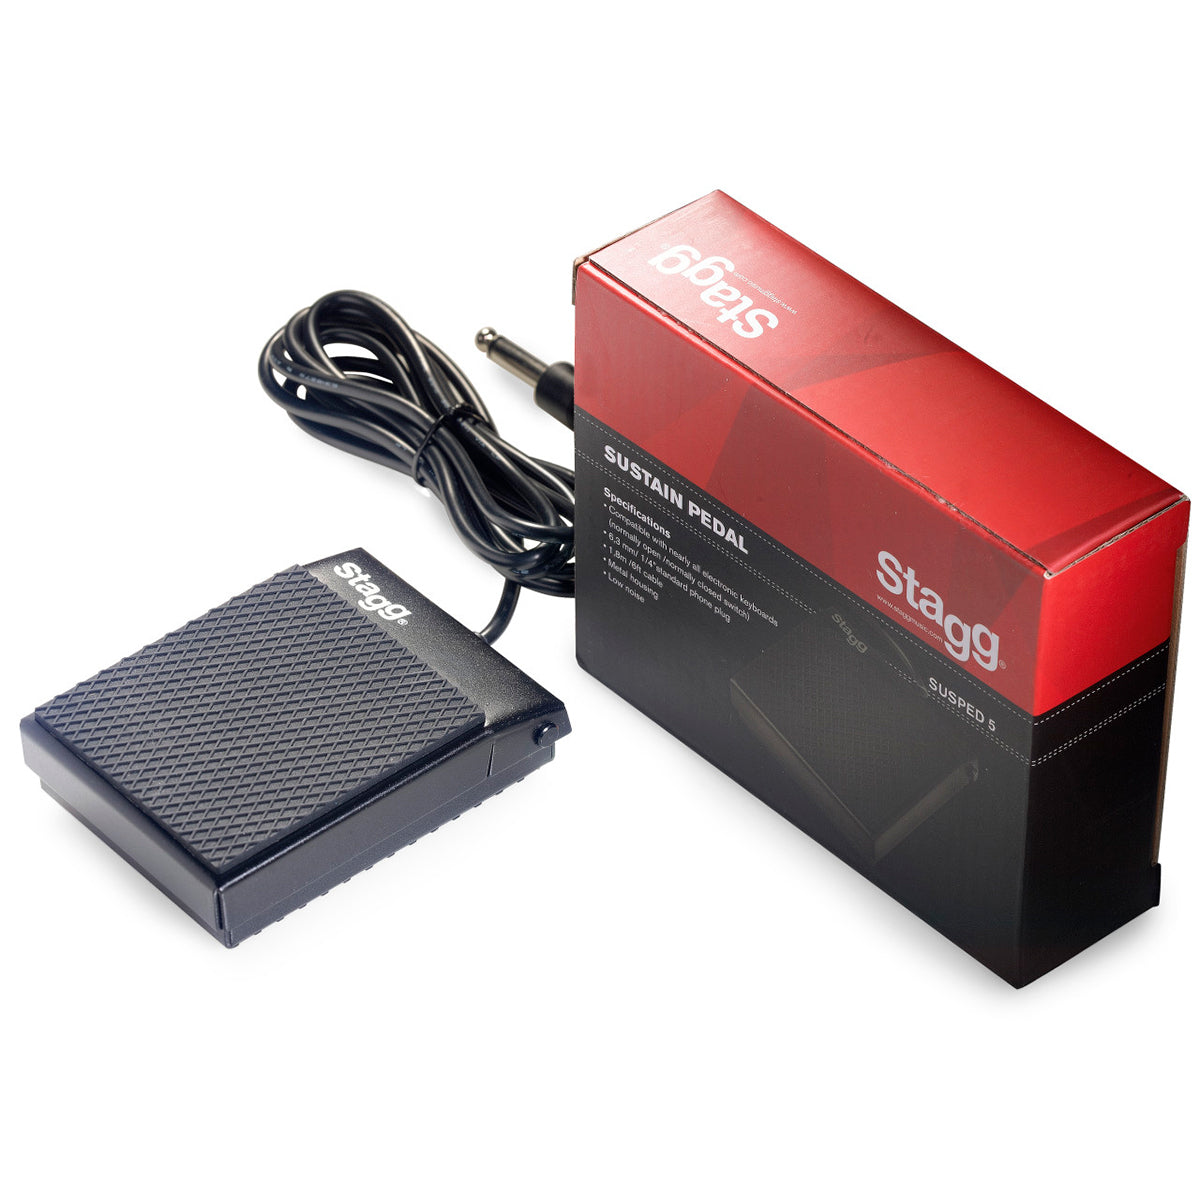 Stagg SUSPED 5 Keyboard Sustain Pedal